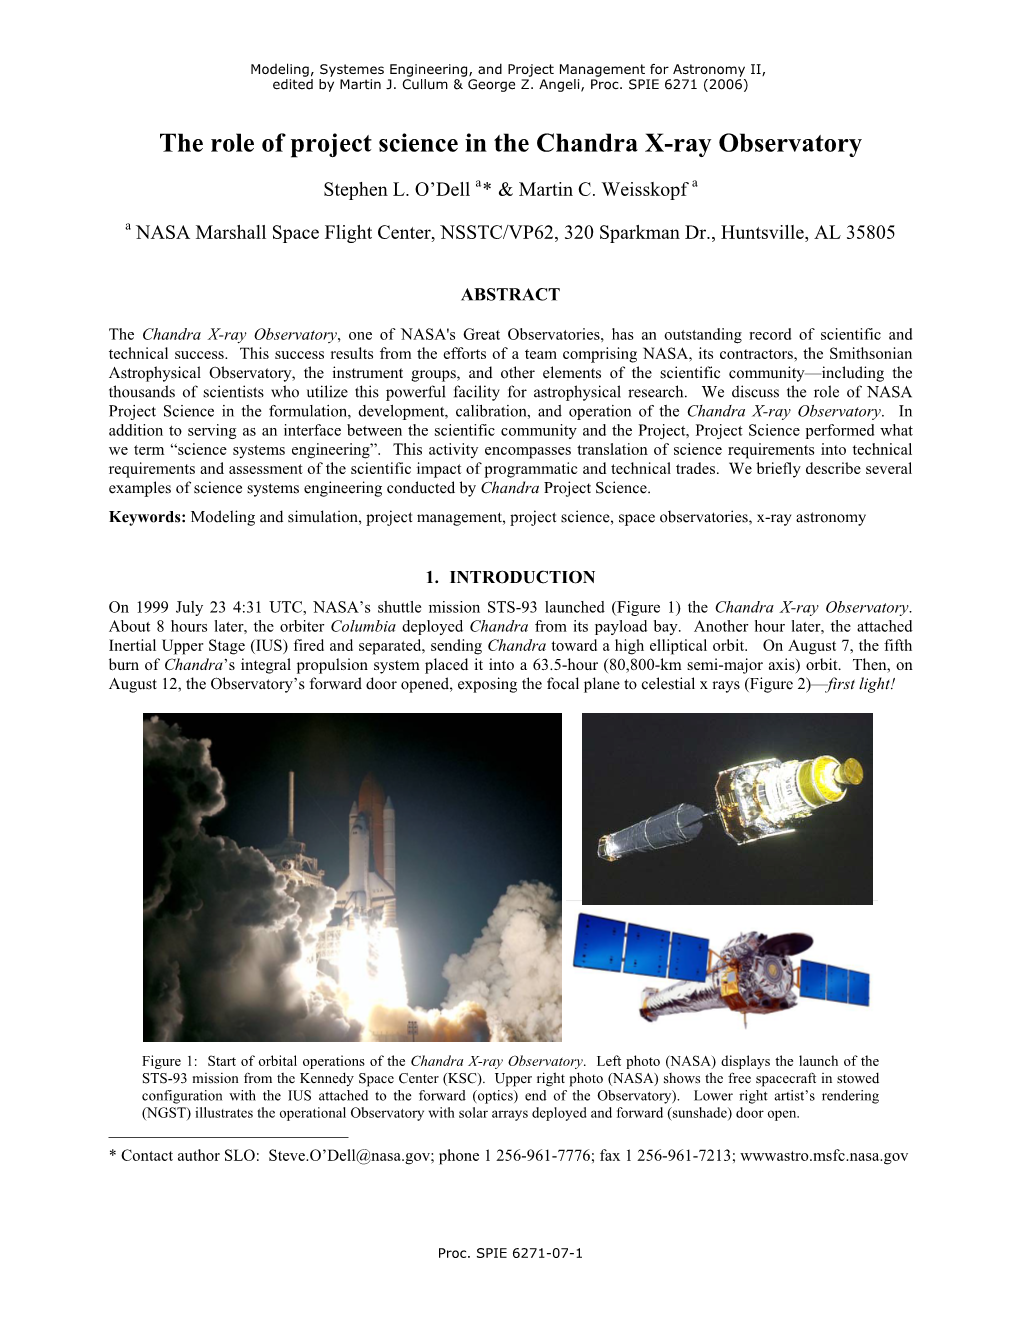 The Role of Project Science in the Chandra X-Ray Observatory